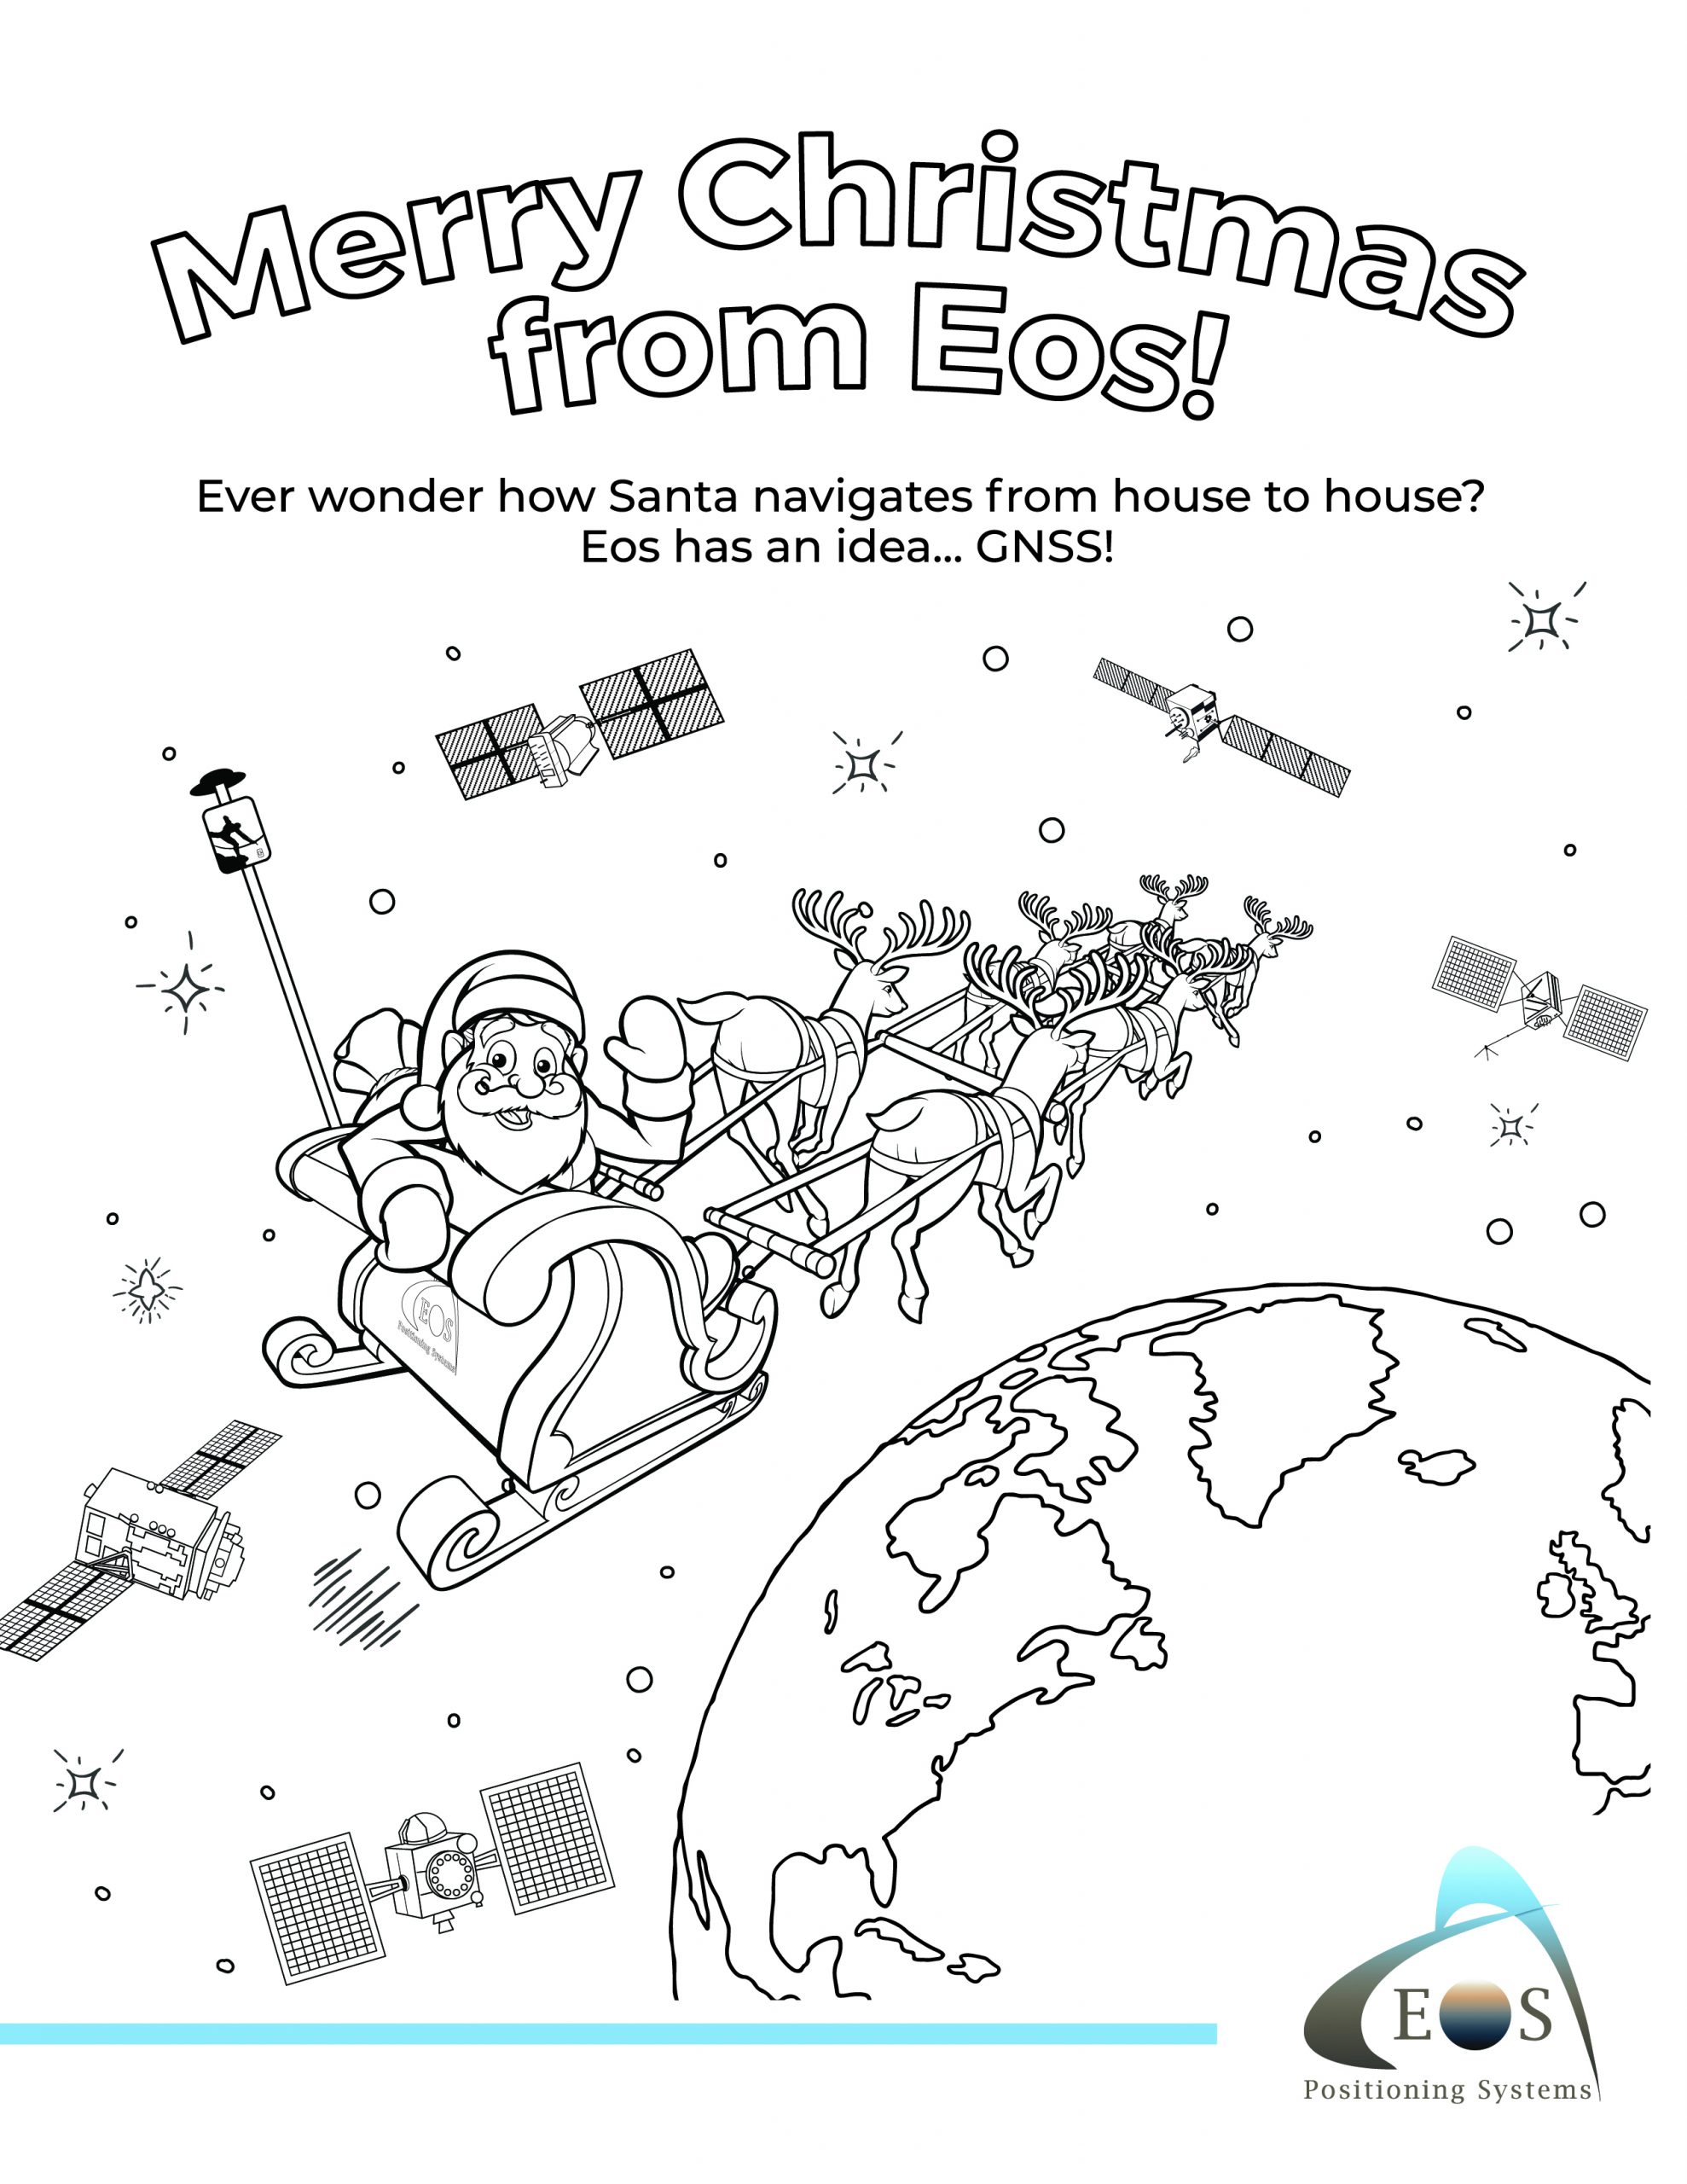 682677_Coloring Book Graphics GNSS Eos 2020